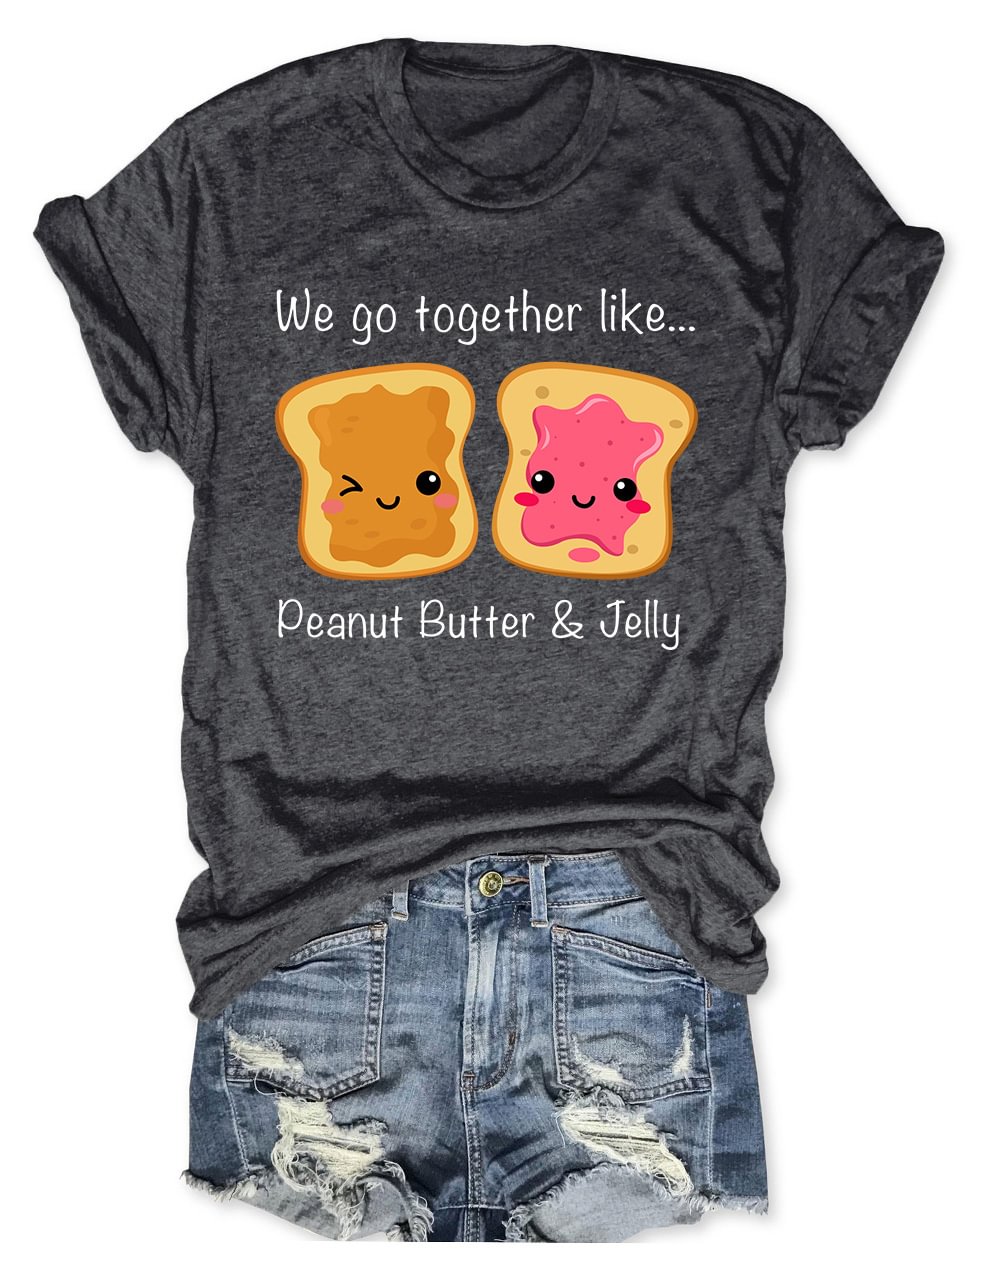 We Go Together Like Peanut Butter & Jelly T-Shirt